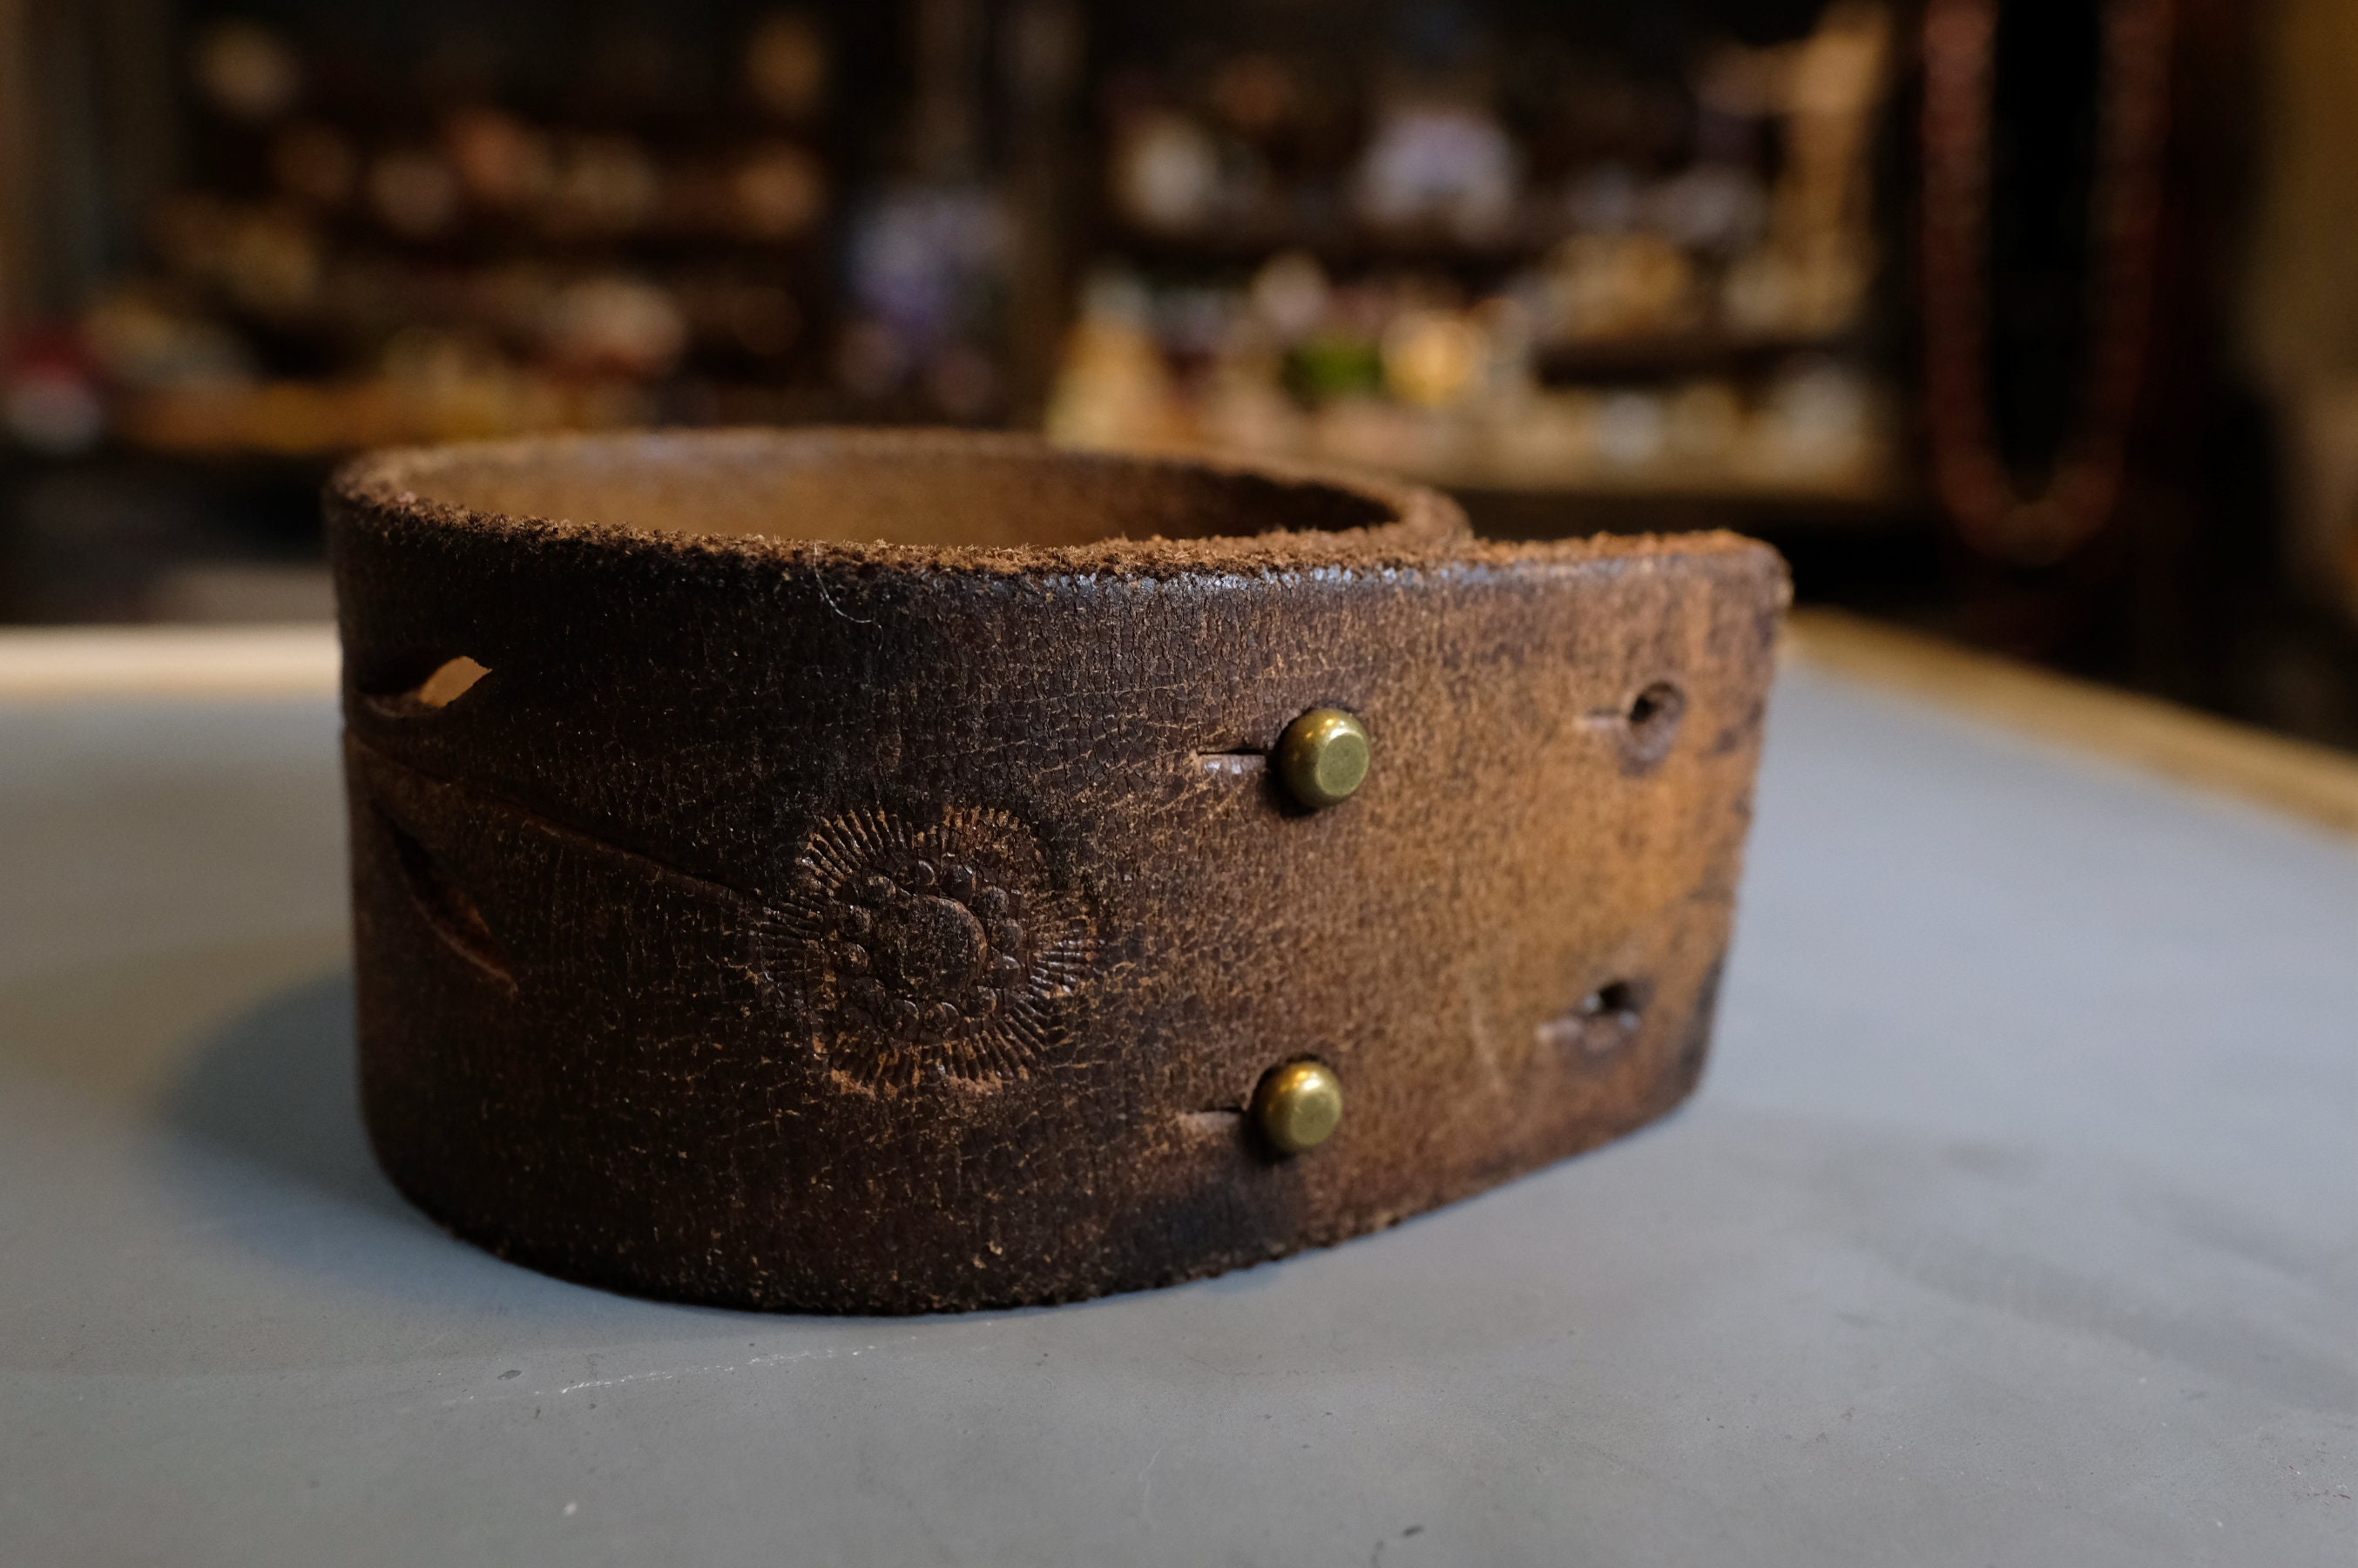 Leather Cuff Bracelet! Nice gift for women! Made in Latvia! Handmade leather Cuff! Unique item!